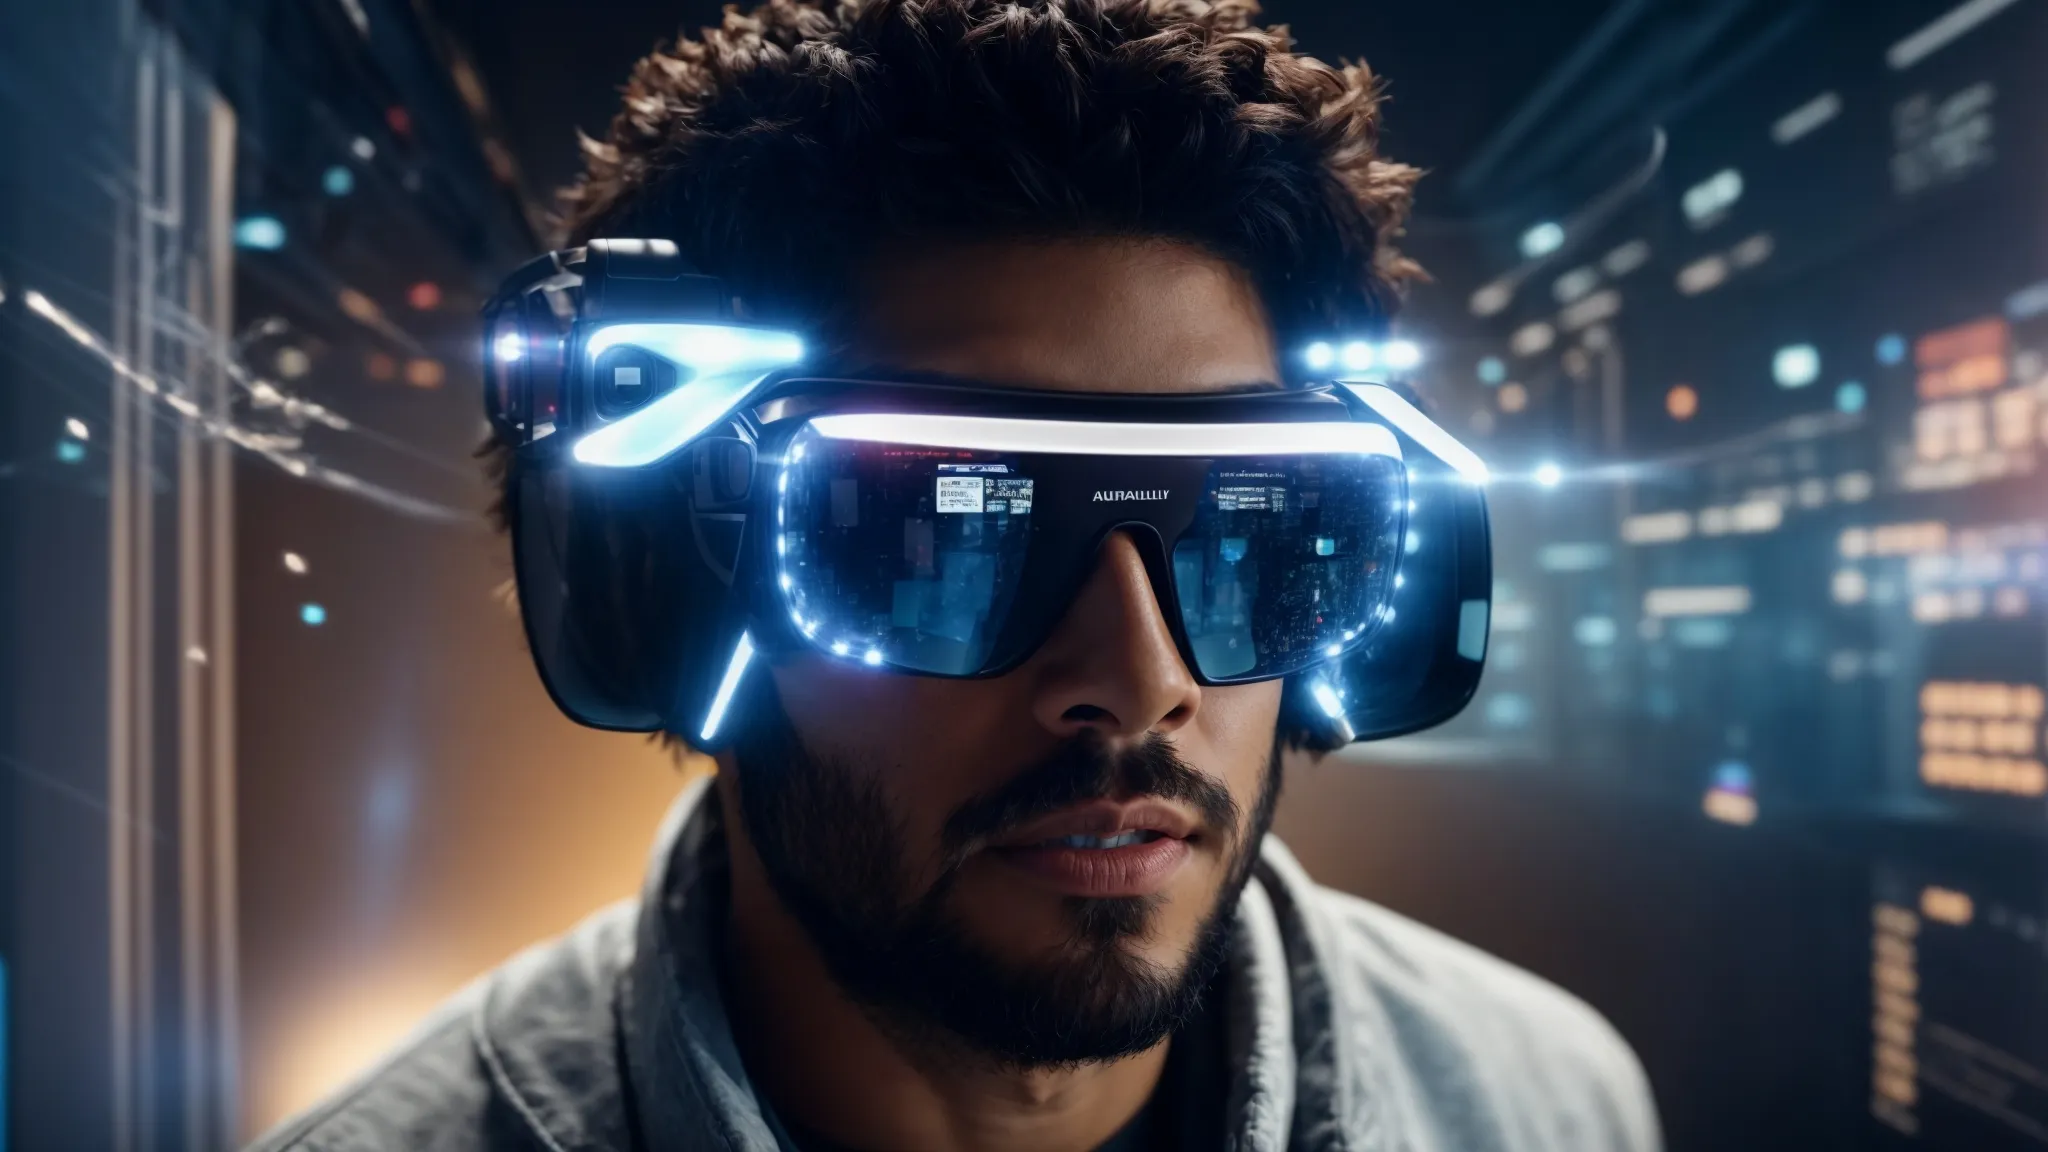 a person wearing augmented reality glasses interacts with a 3d virtual interface while browsing through a futuristic digital marketing space.